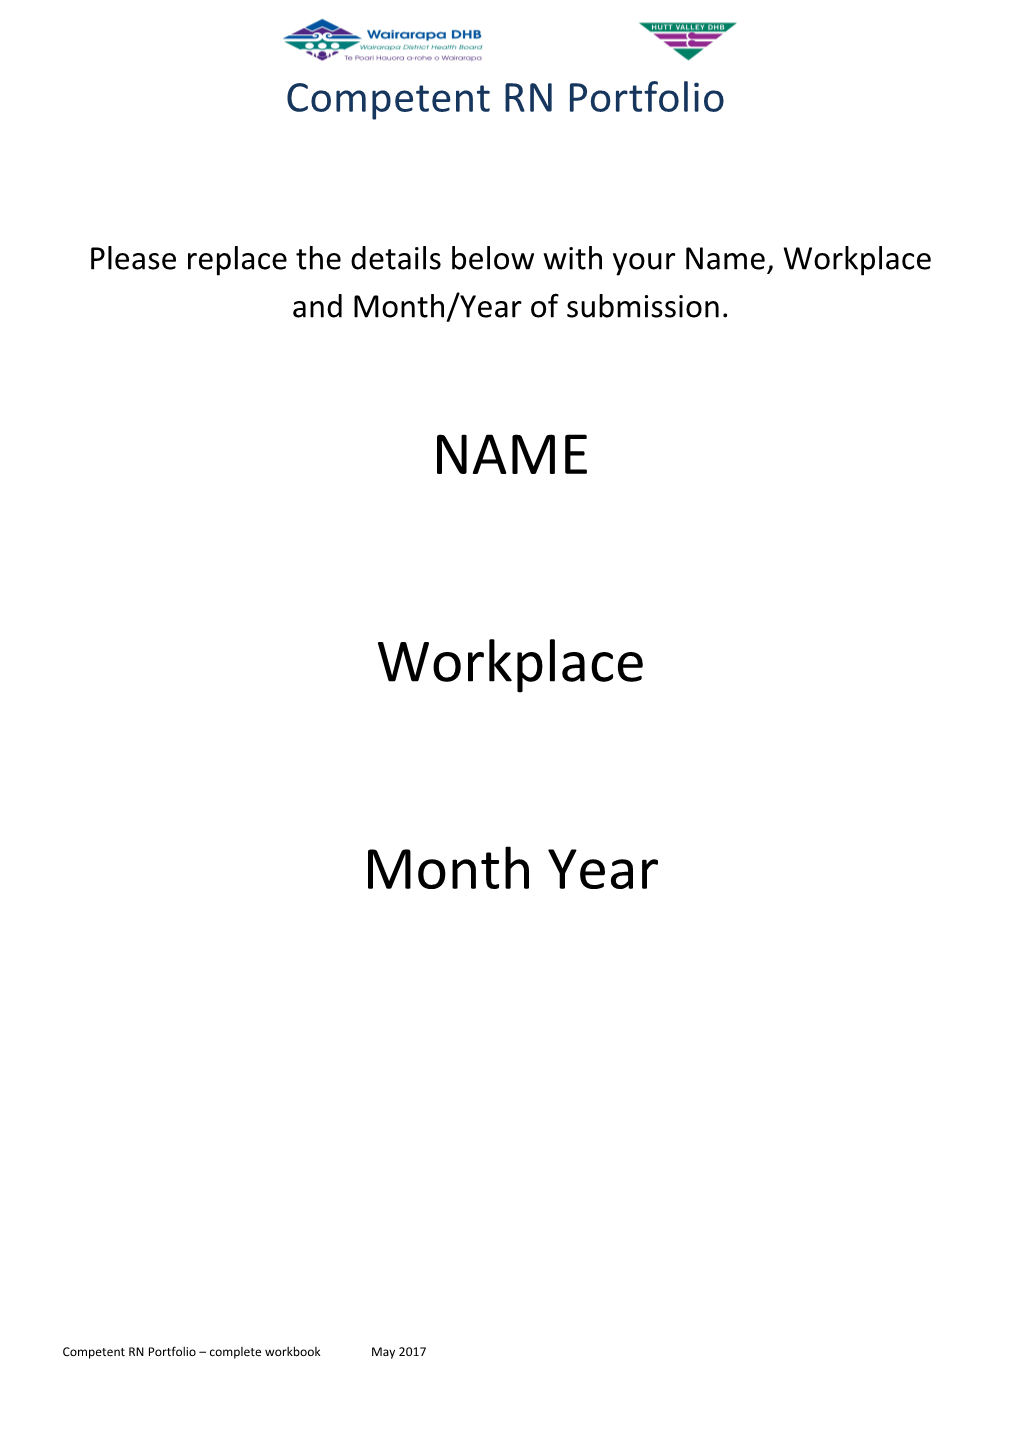 Please Replace This Page with Your Title Page Including Your Name, Workplace and Level